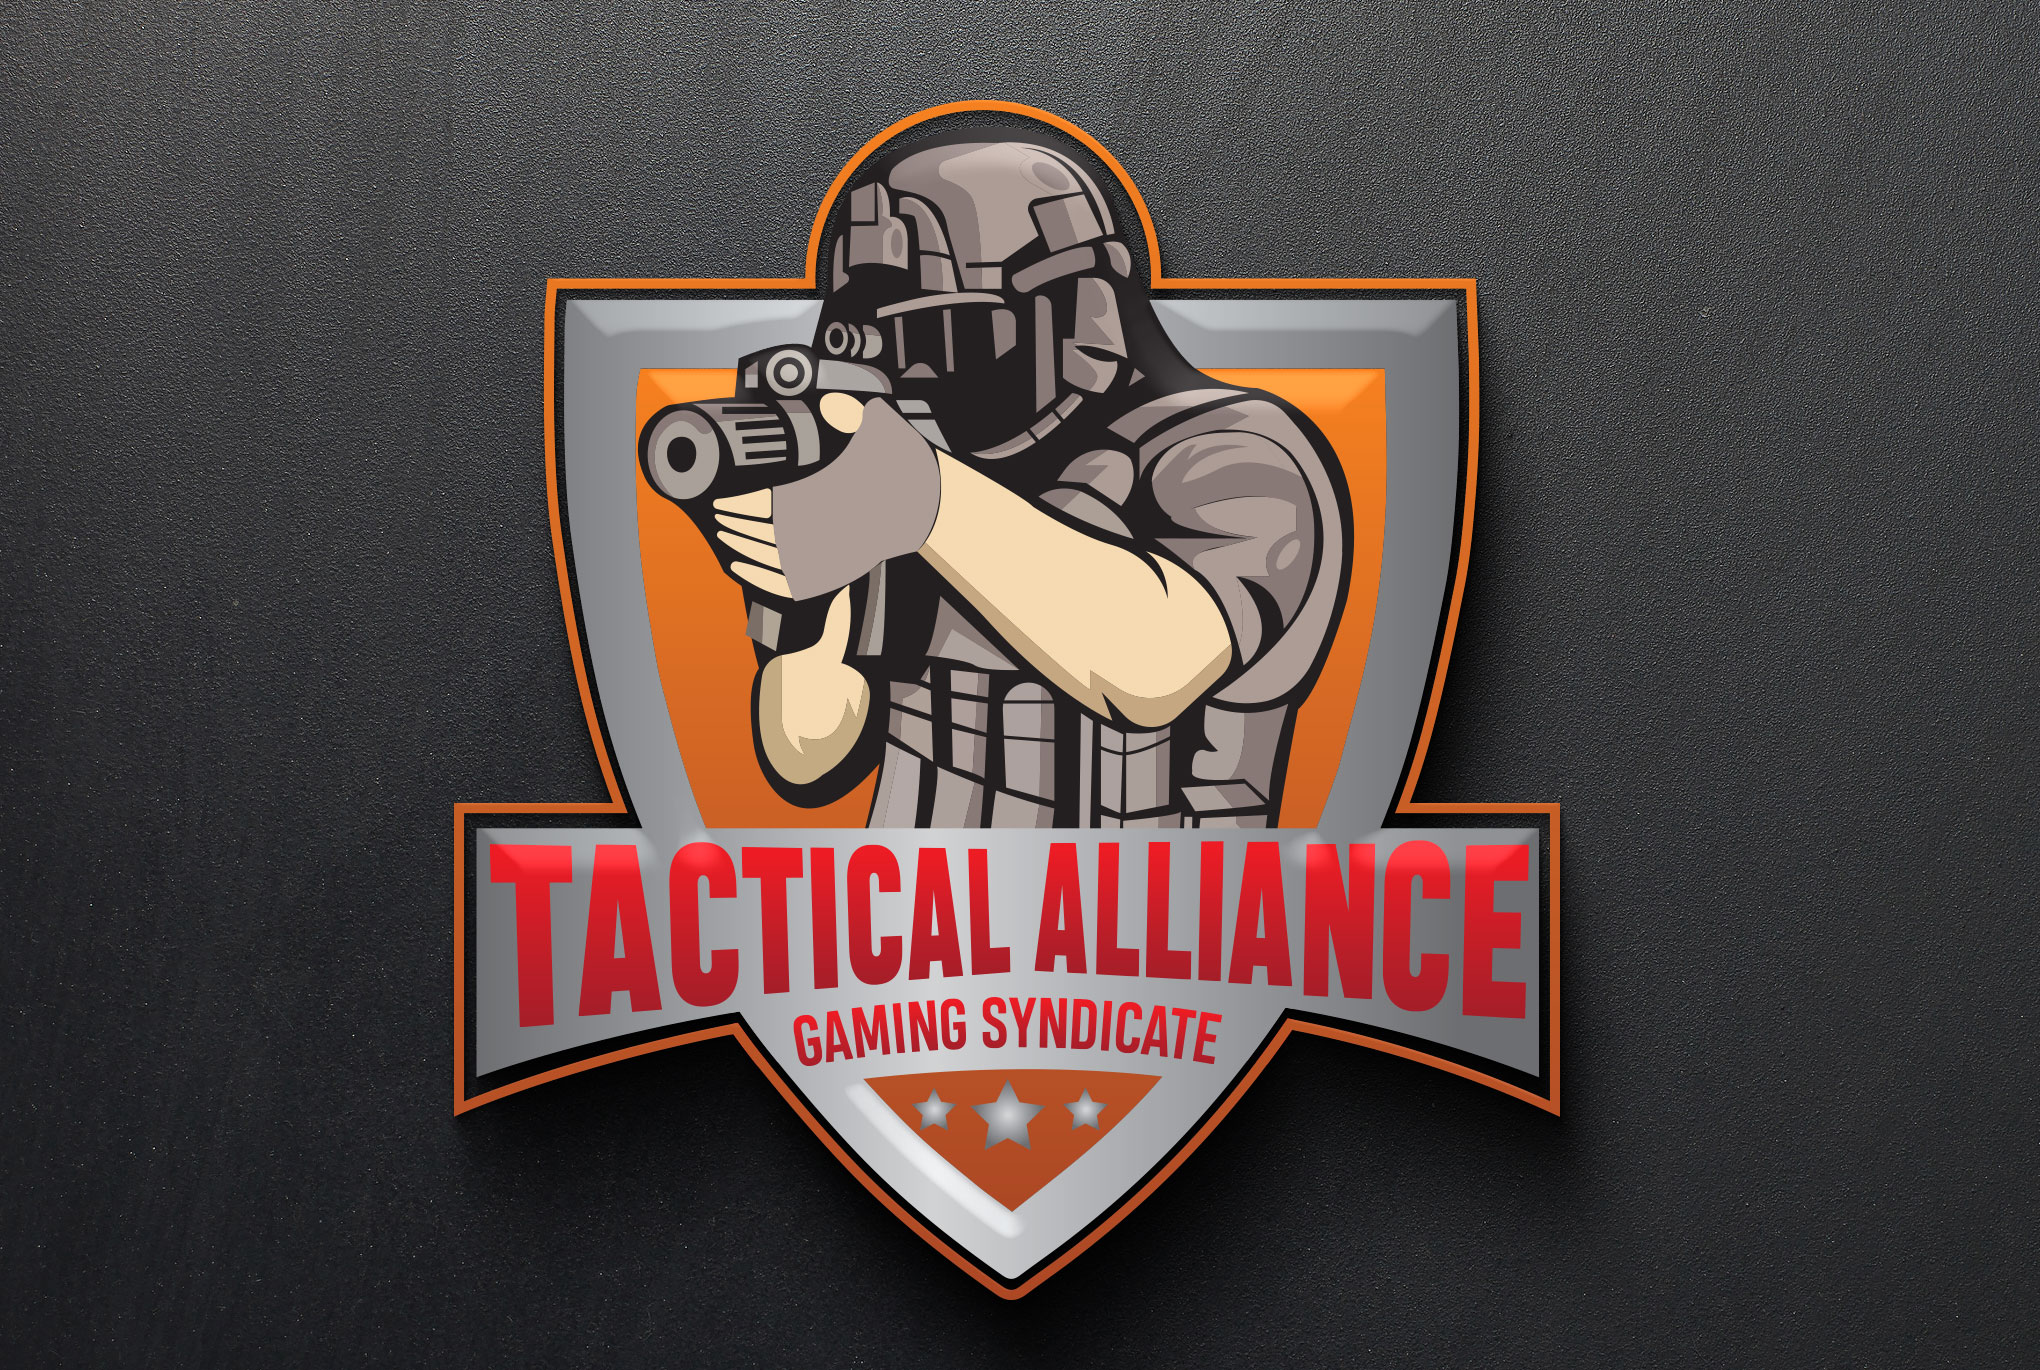 Tactical Alliance Gaming Syndicate